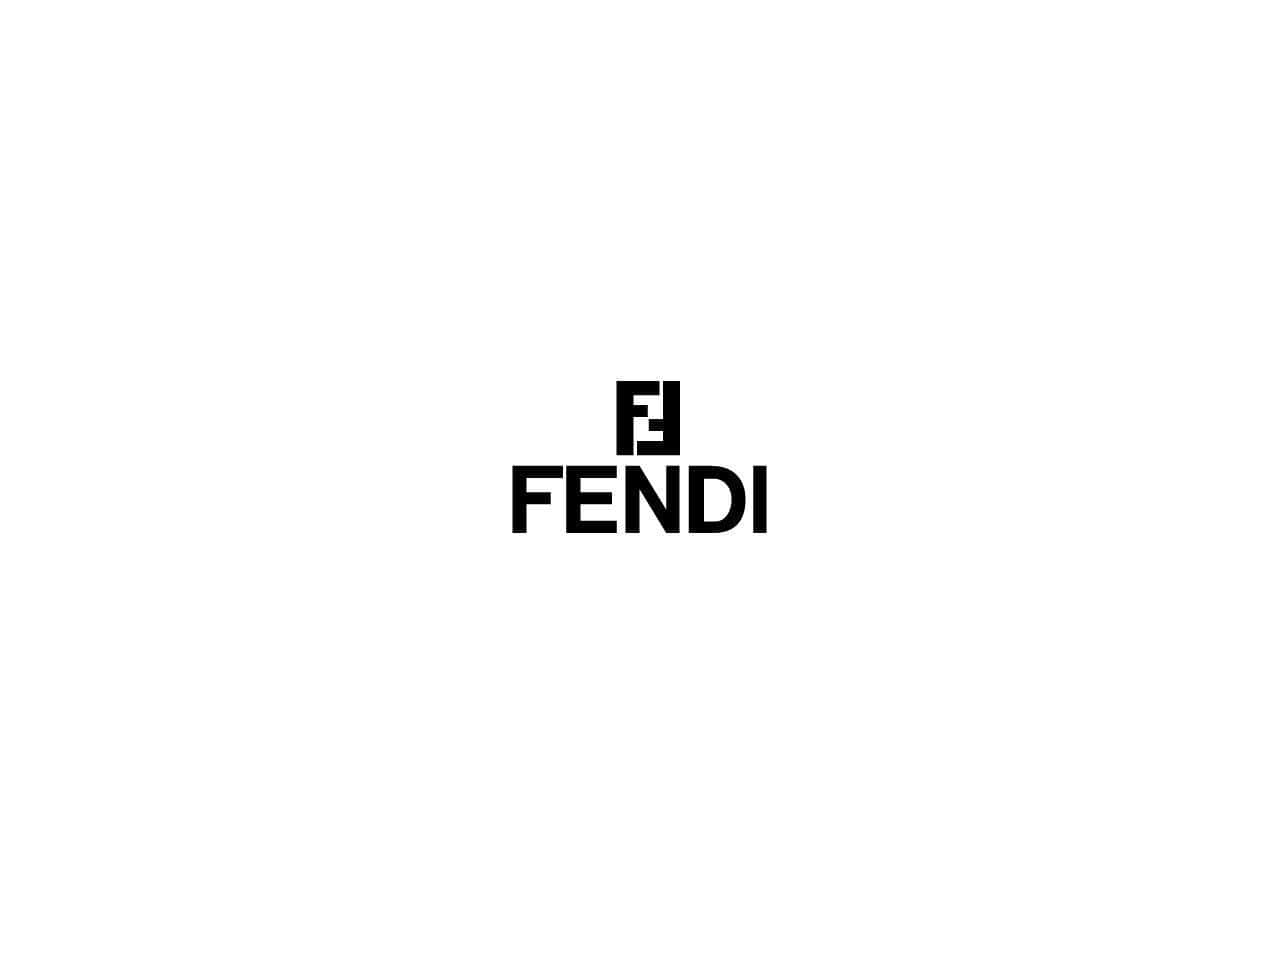 Dress up in Fendi for the night!